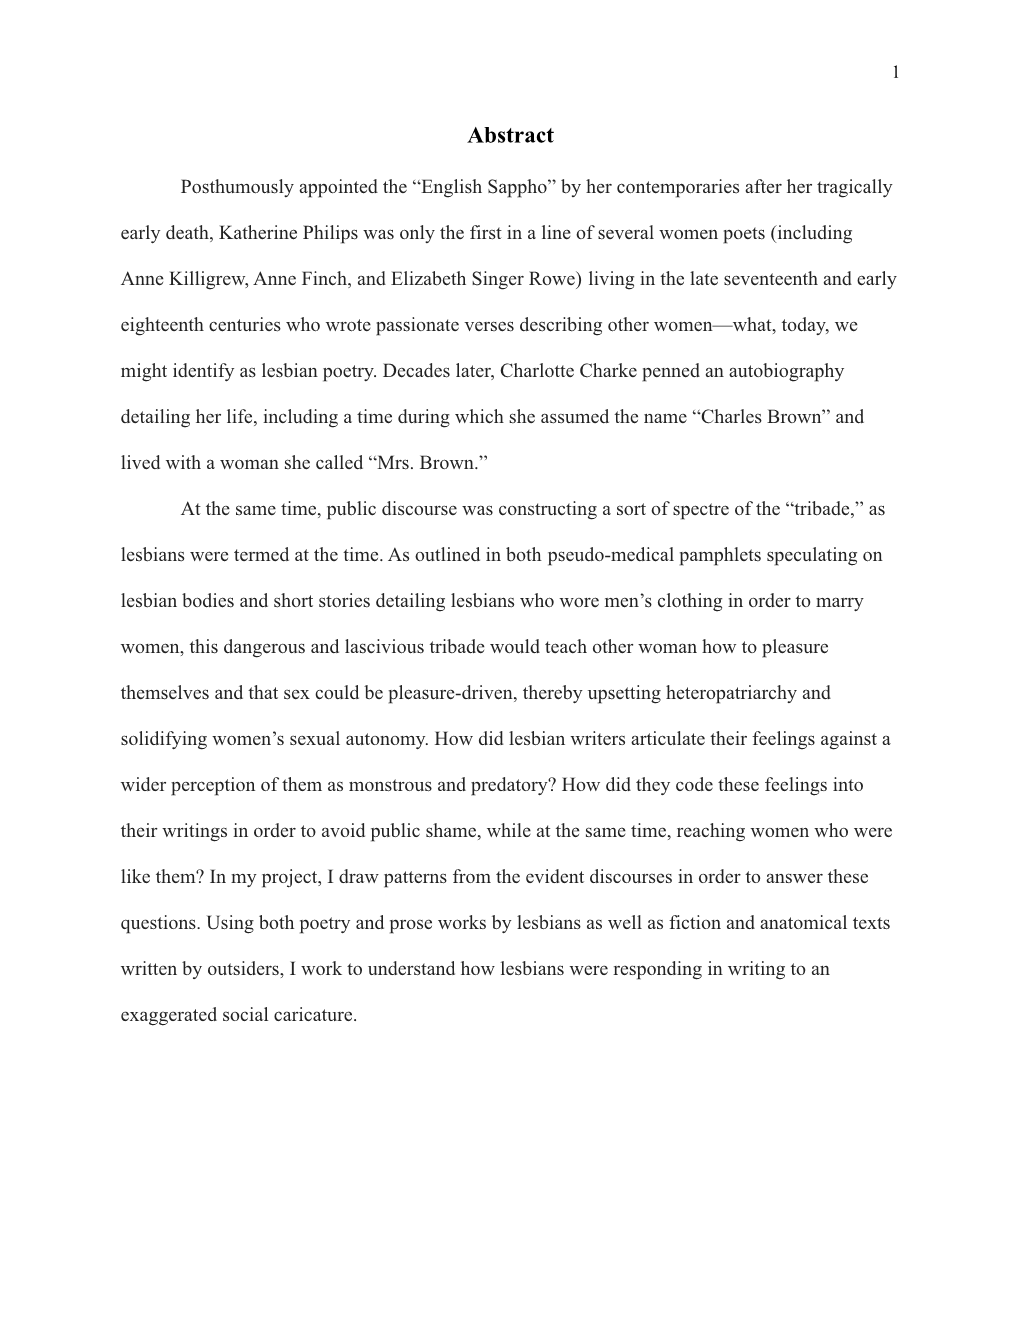 Thesis Submitted to the Department of English of Mount Holyoke College, In